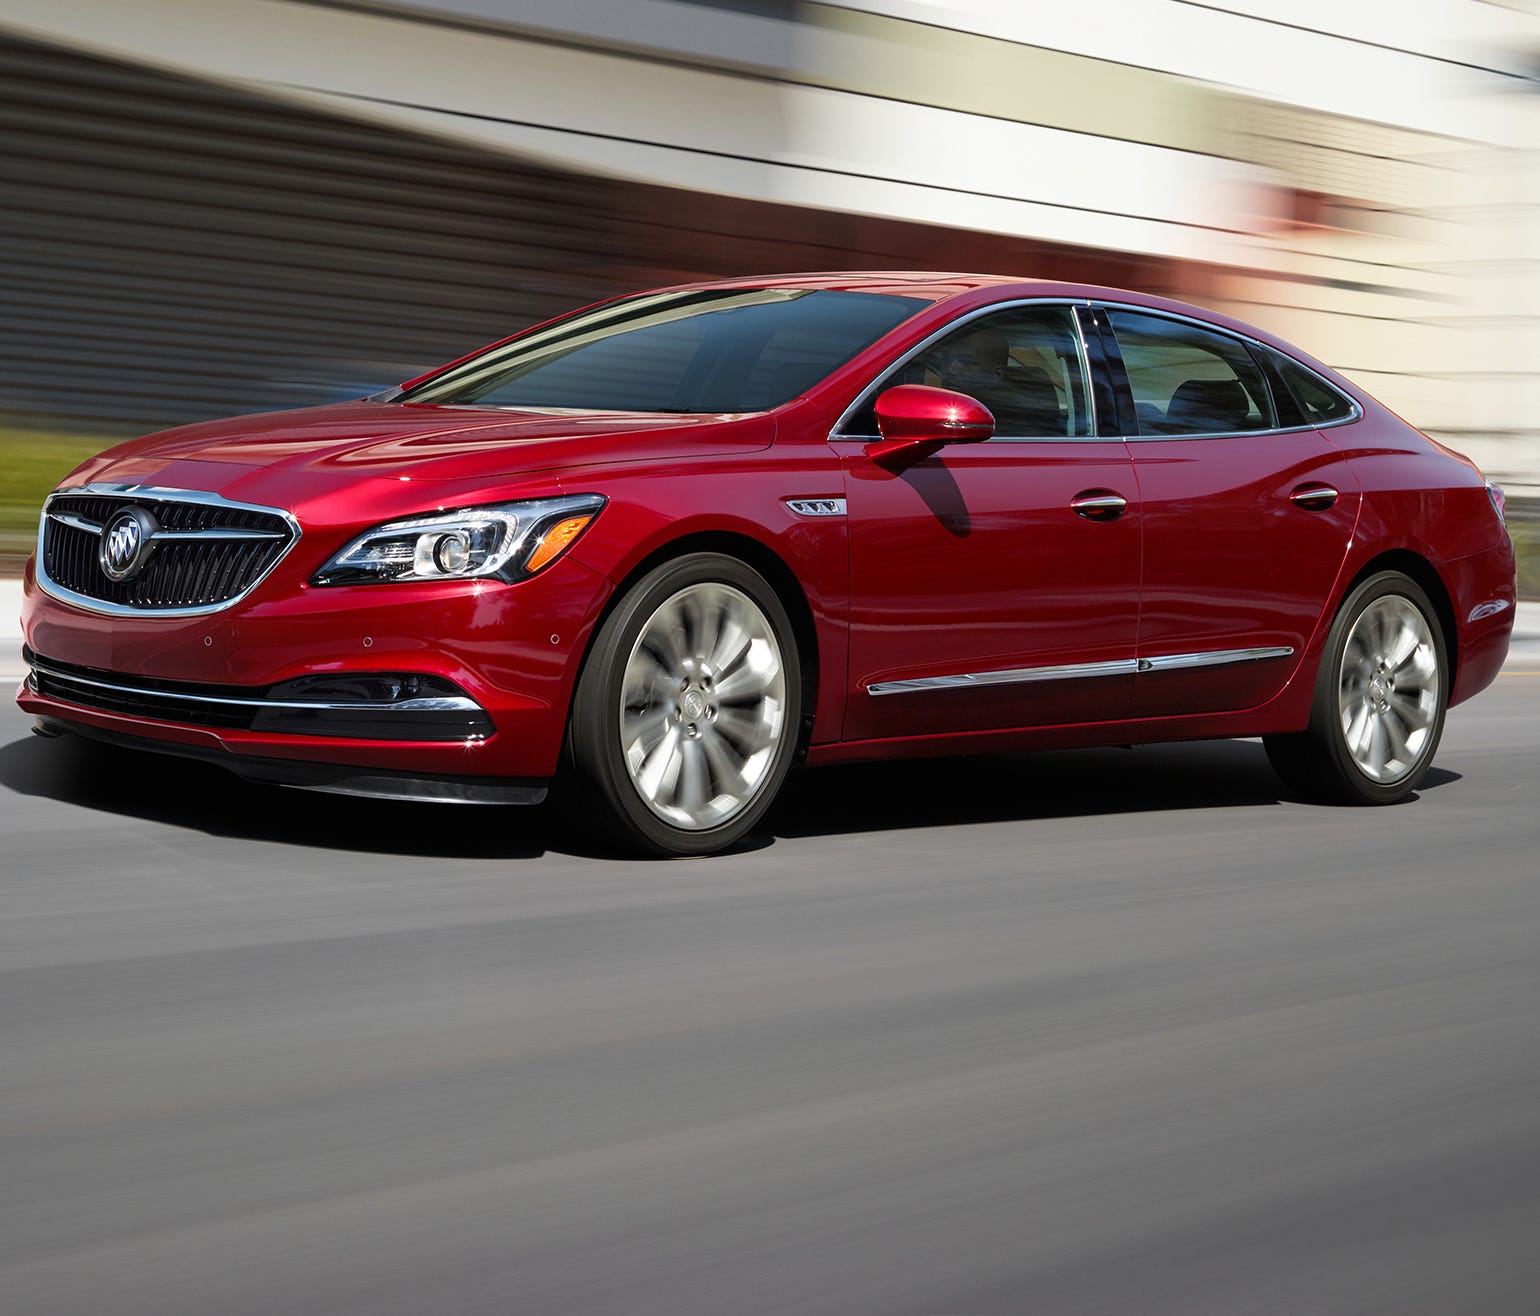 2018 Buick LaCrosse ranked top in its segment